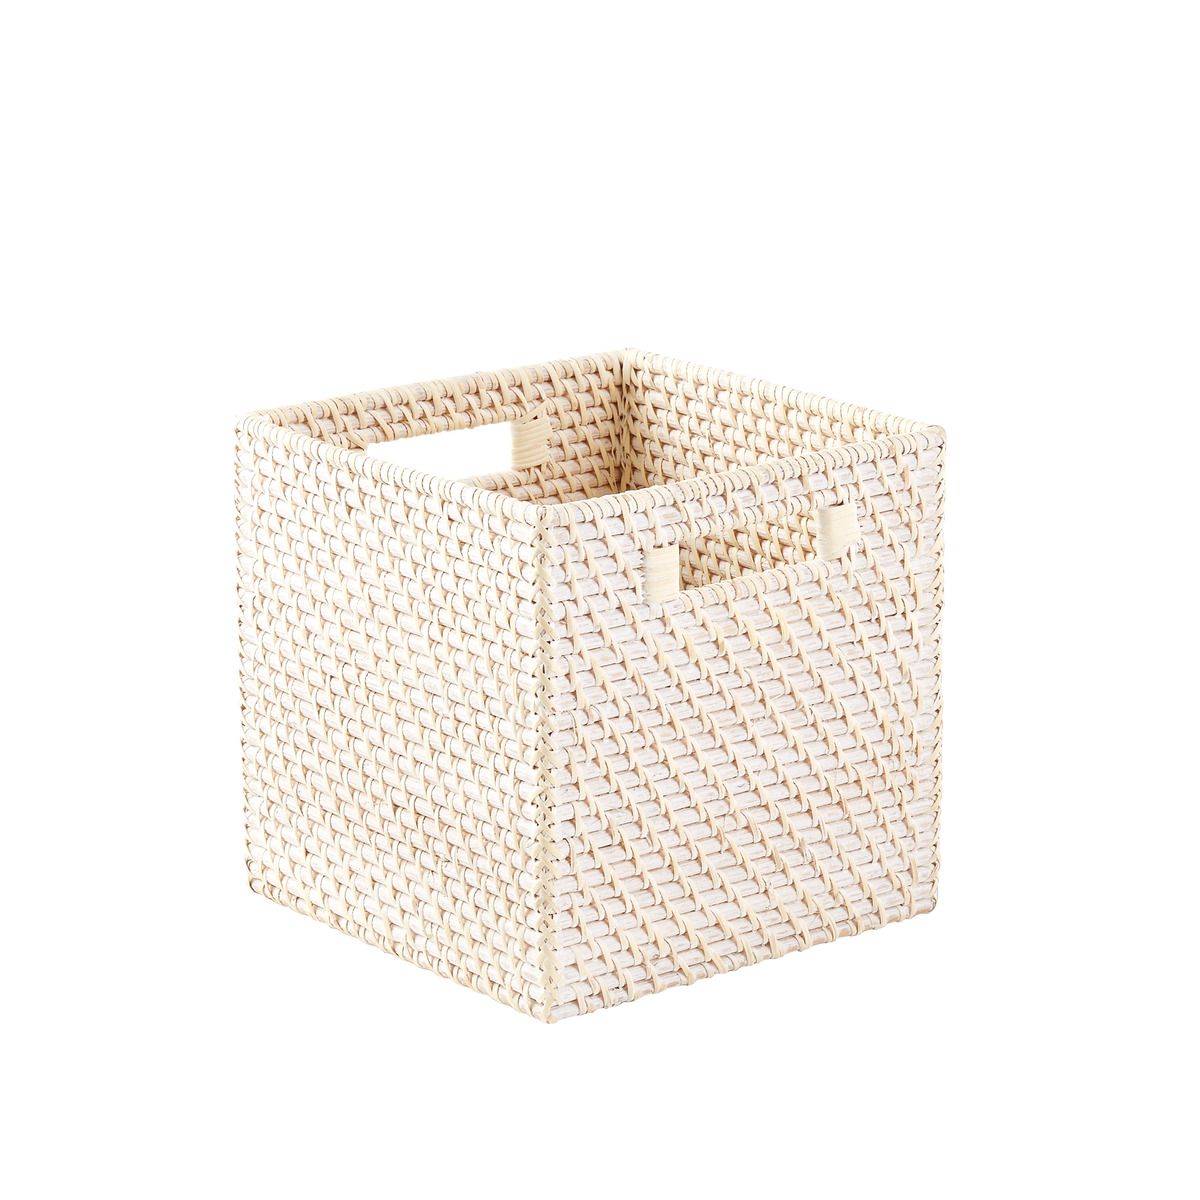 Rattan Cube w/ Handles | The Container Store